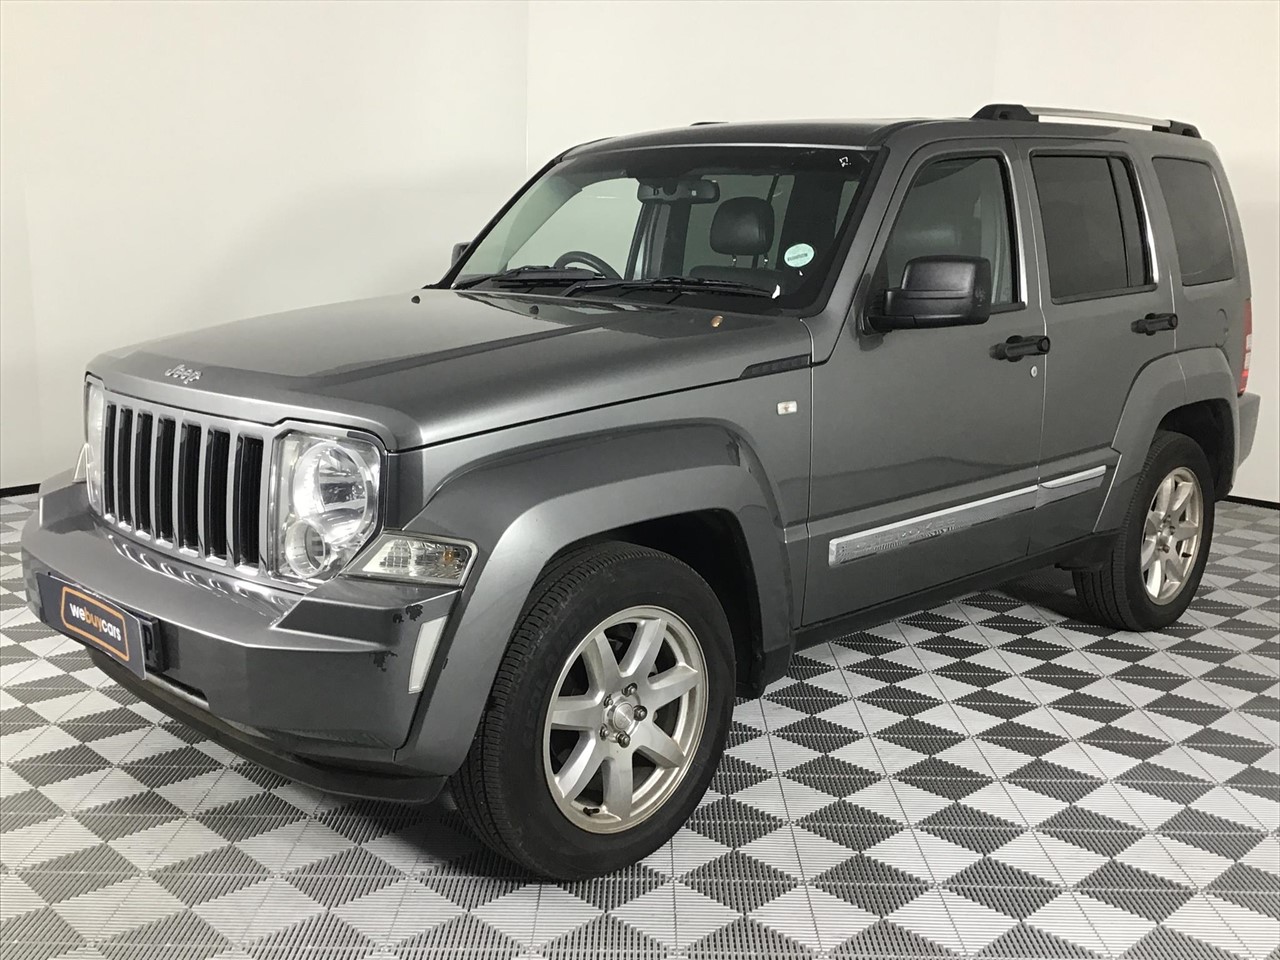 Used 2012 Jeep Cherokee 3.7 Limited Auto for sale WeBuyCars